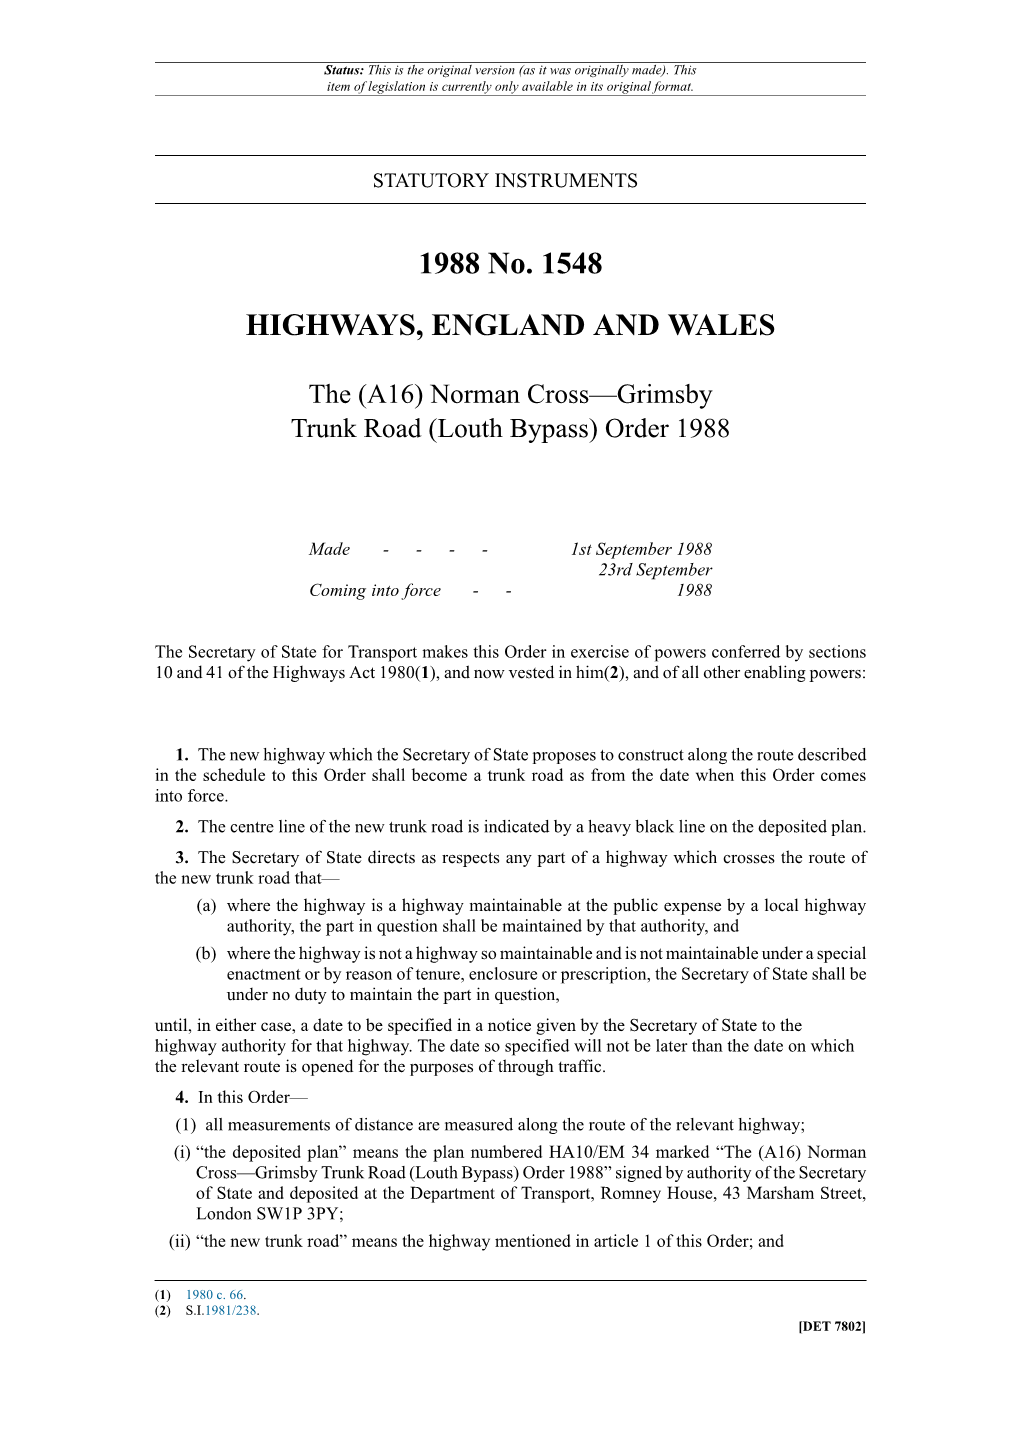 Norman Cross—Grimsby Trunk Road (Louth Bypass) Order 1988